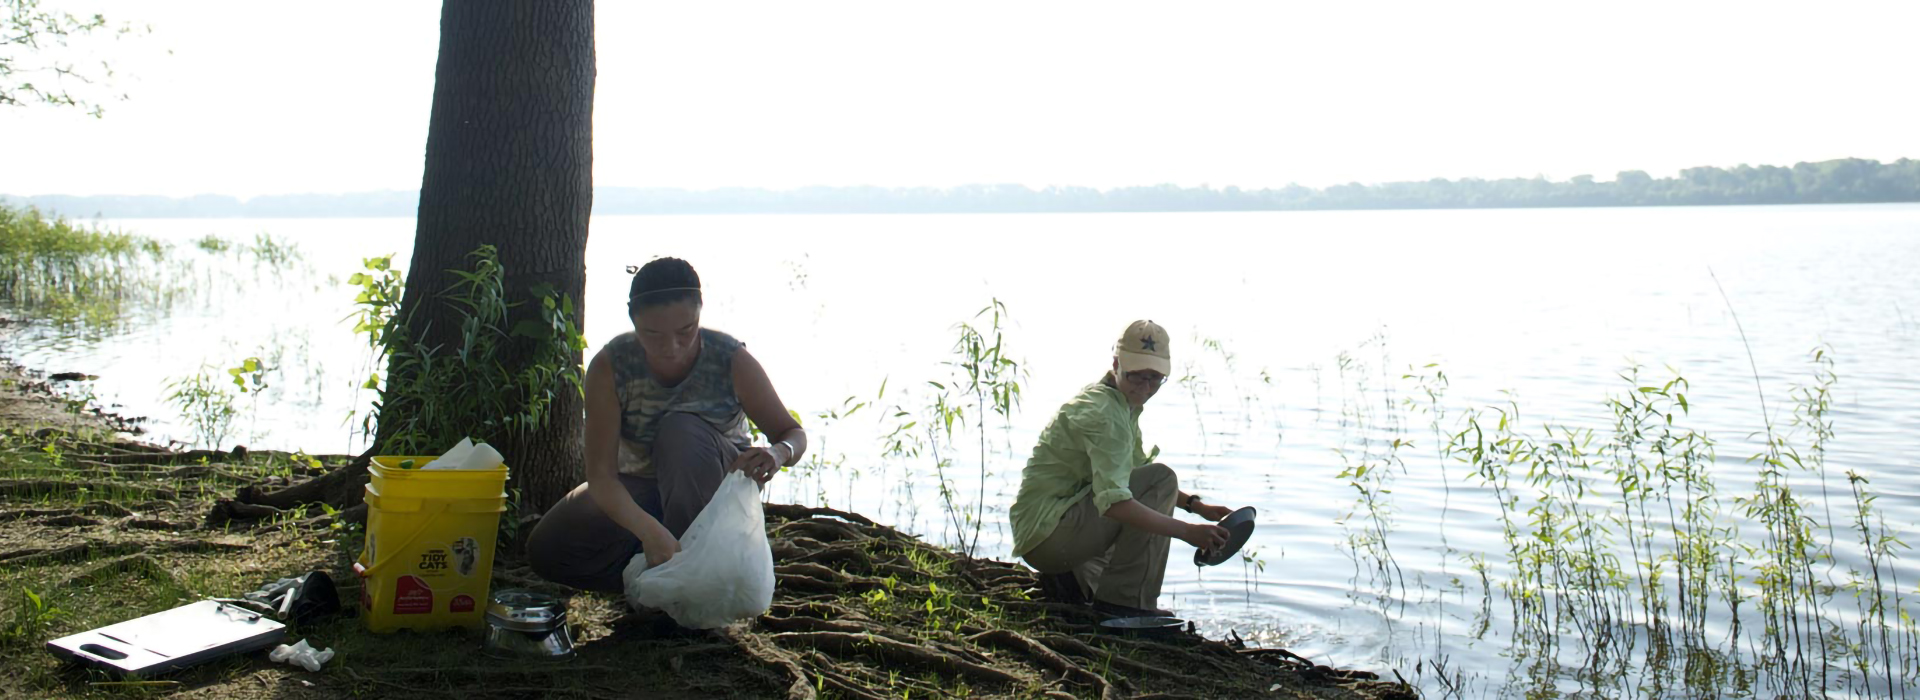 two people cleaning up garbage near a lake